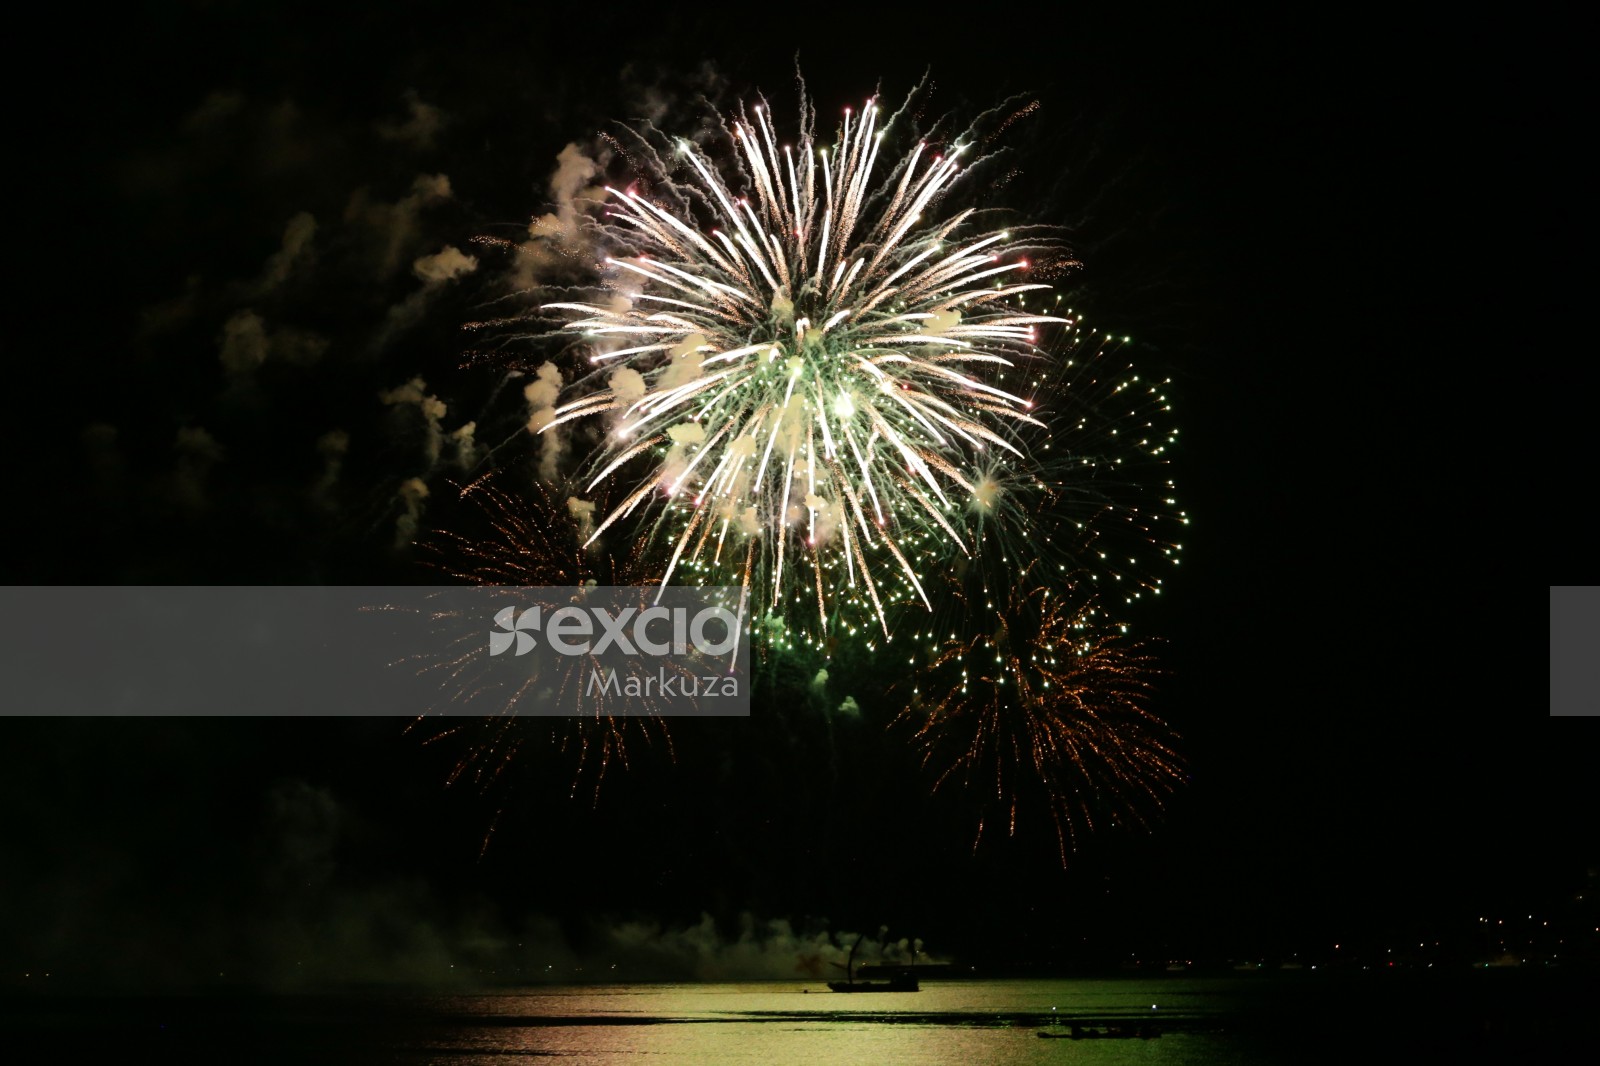 Bright fireworks and silhouette of ship in the water